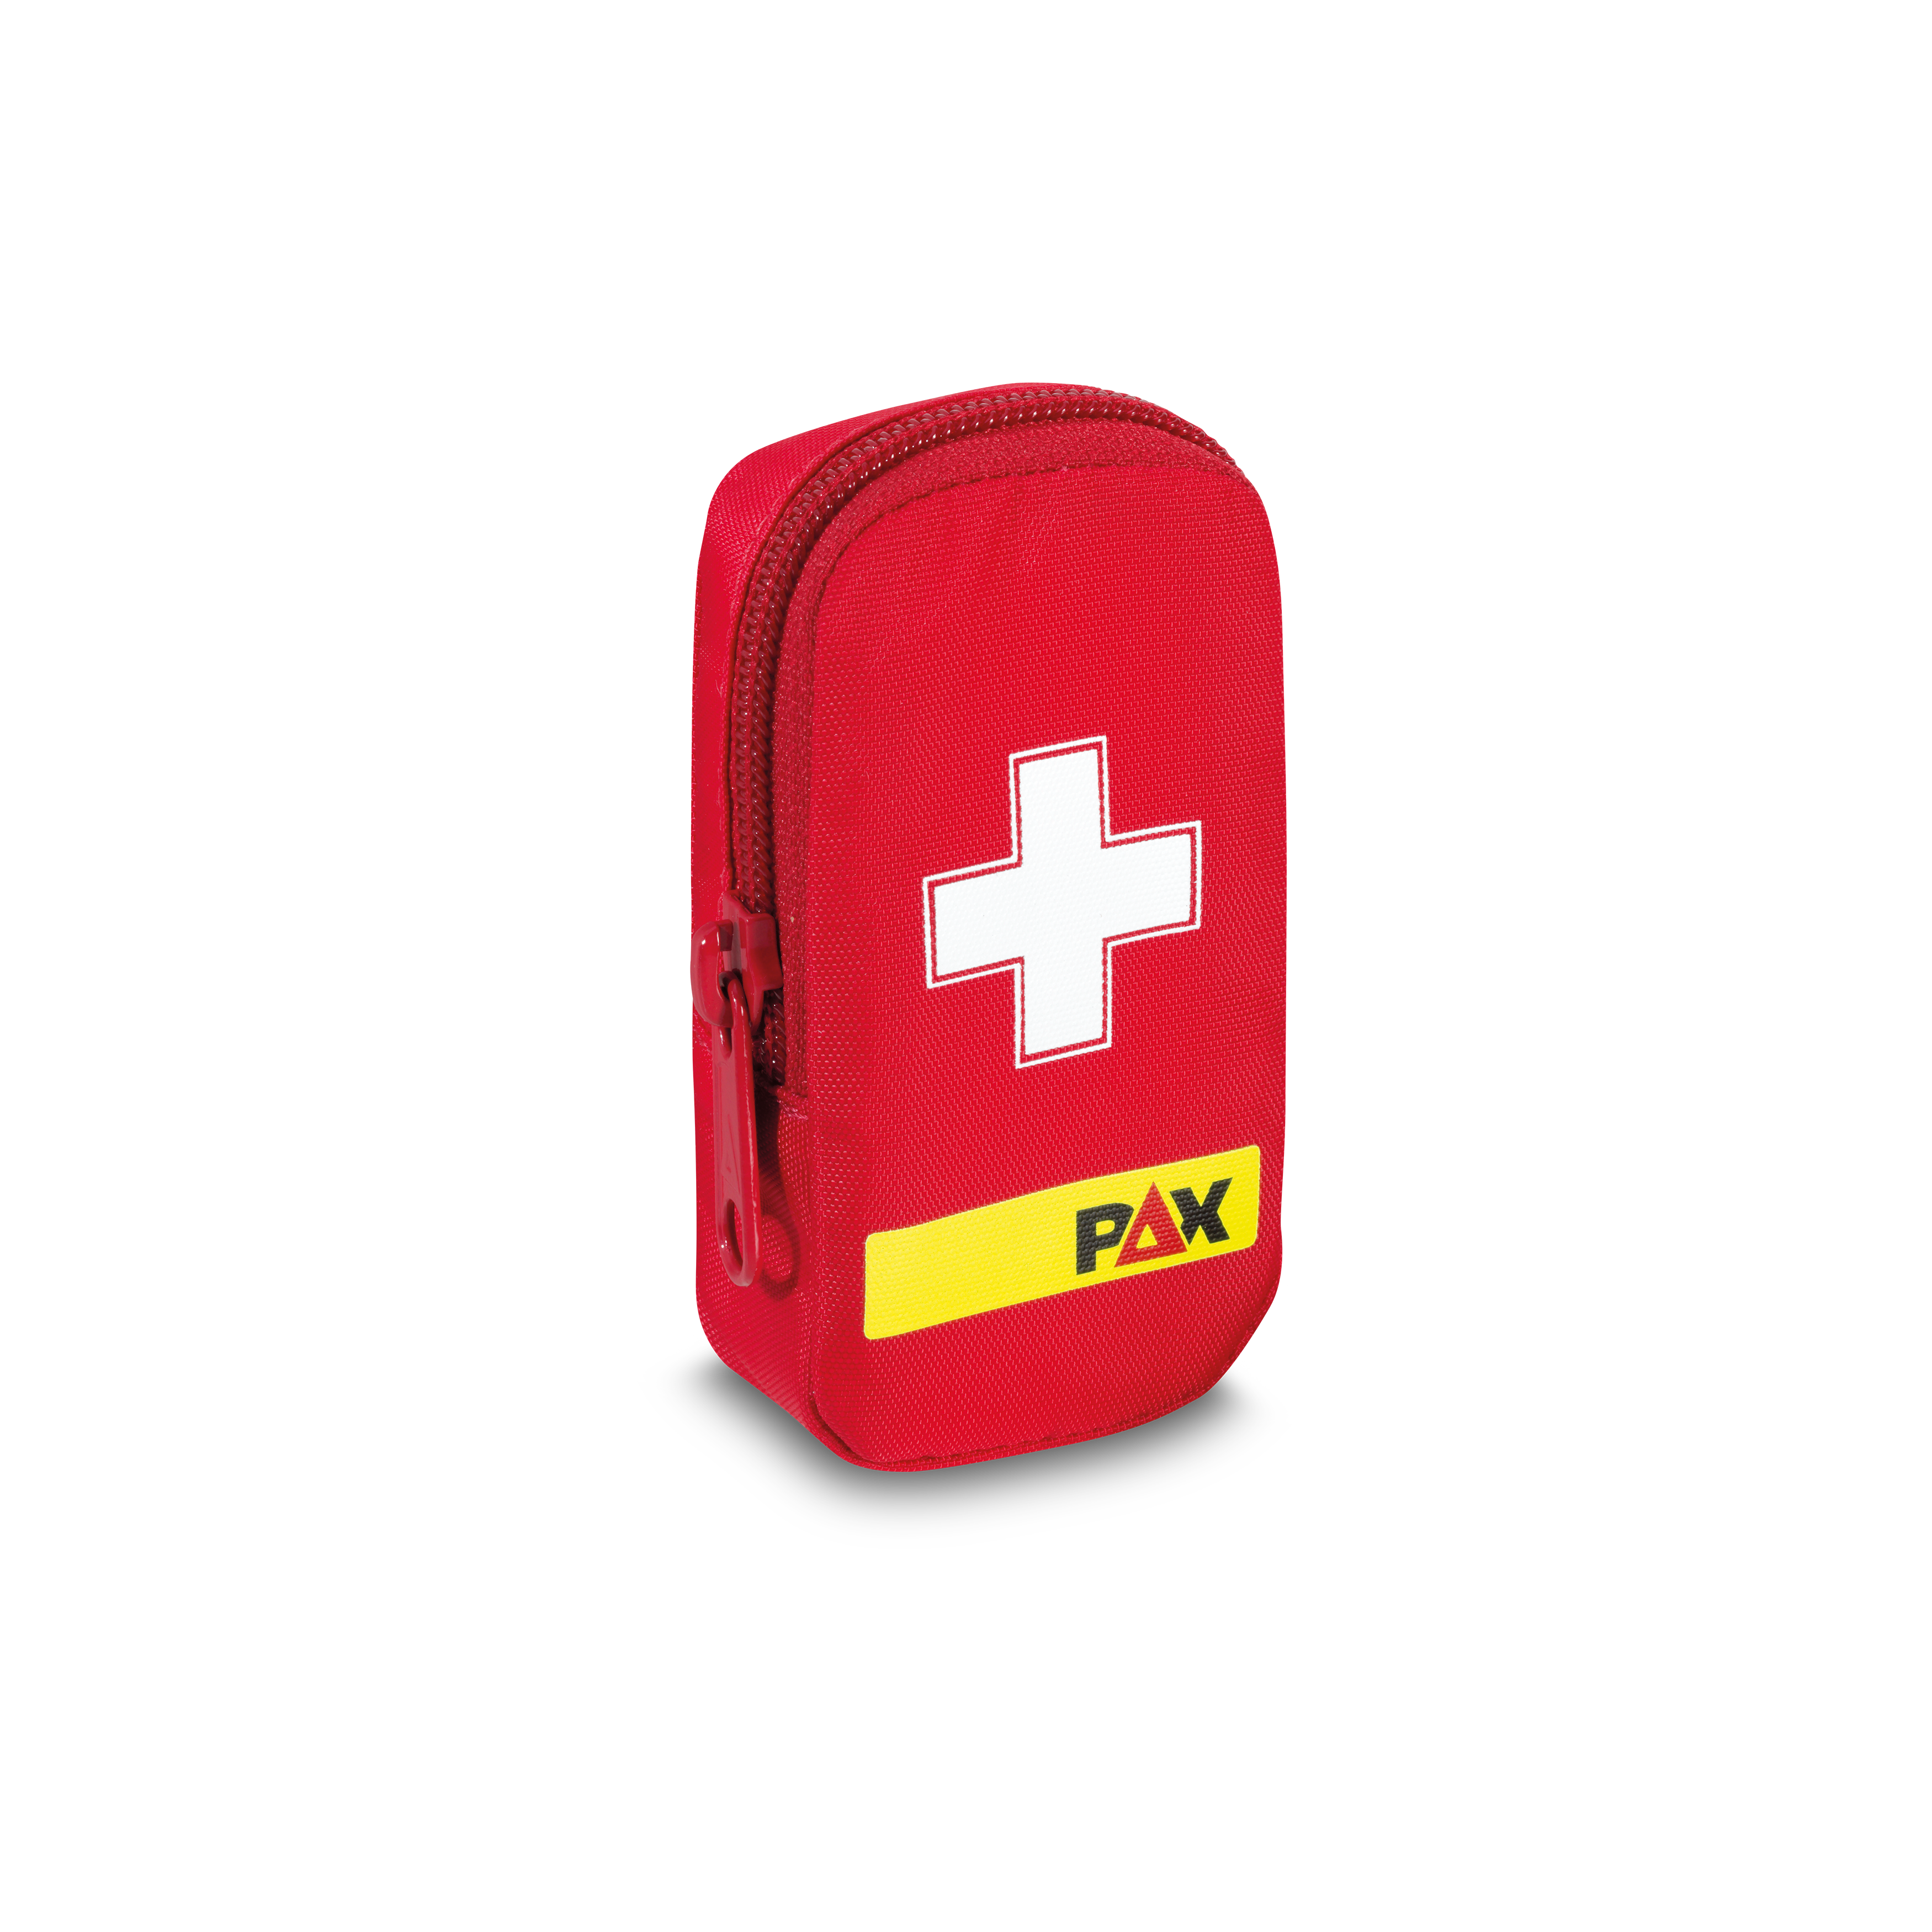 PAX Tablet Pocket First-Aid